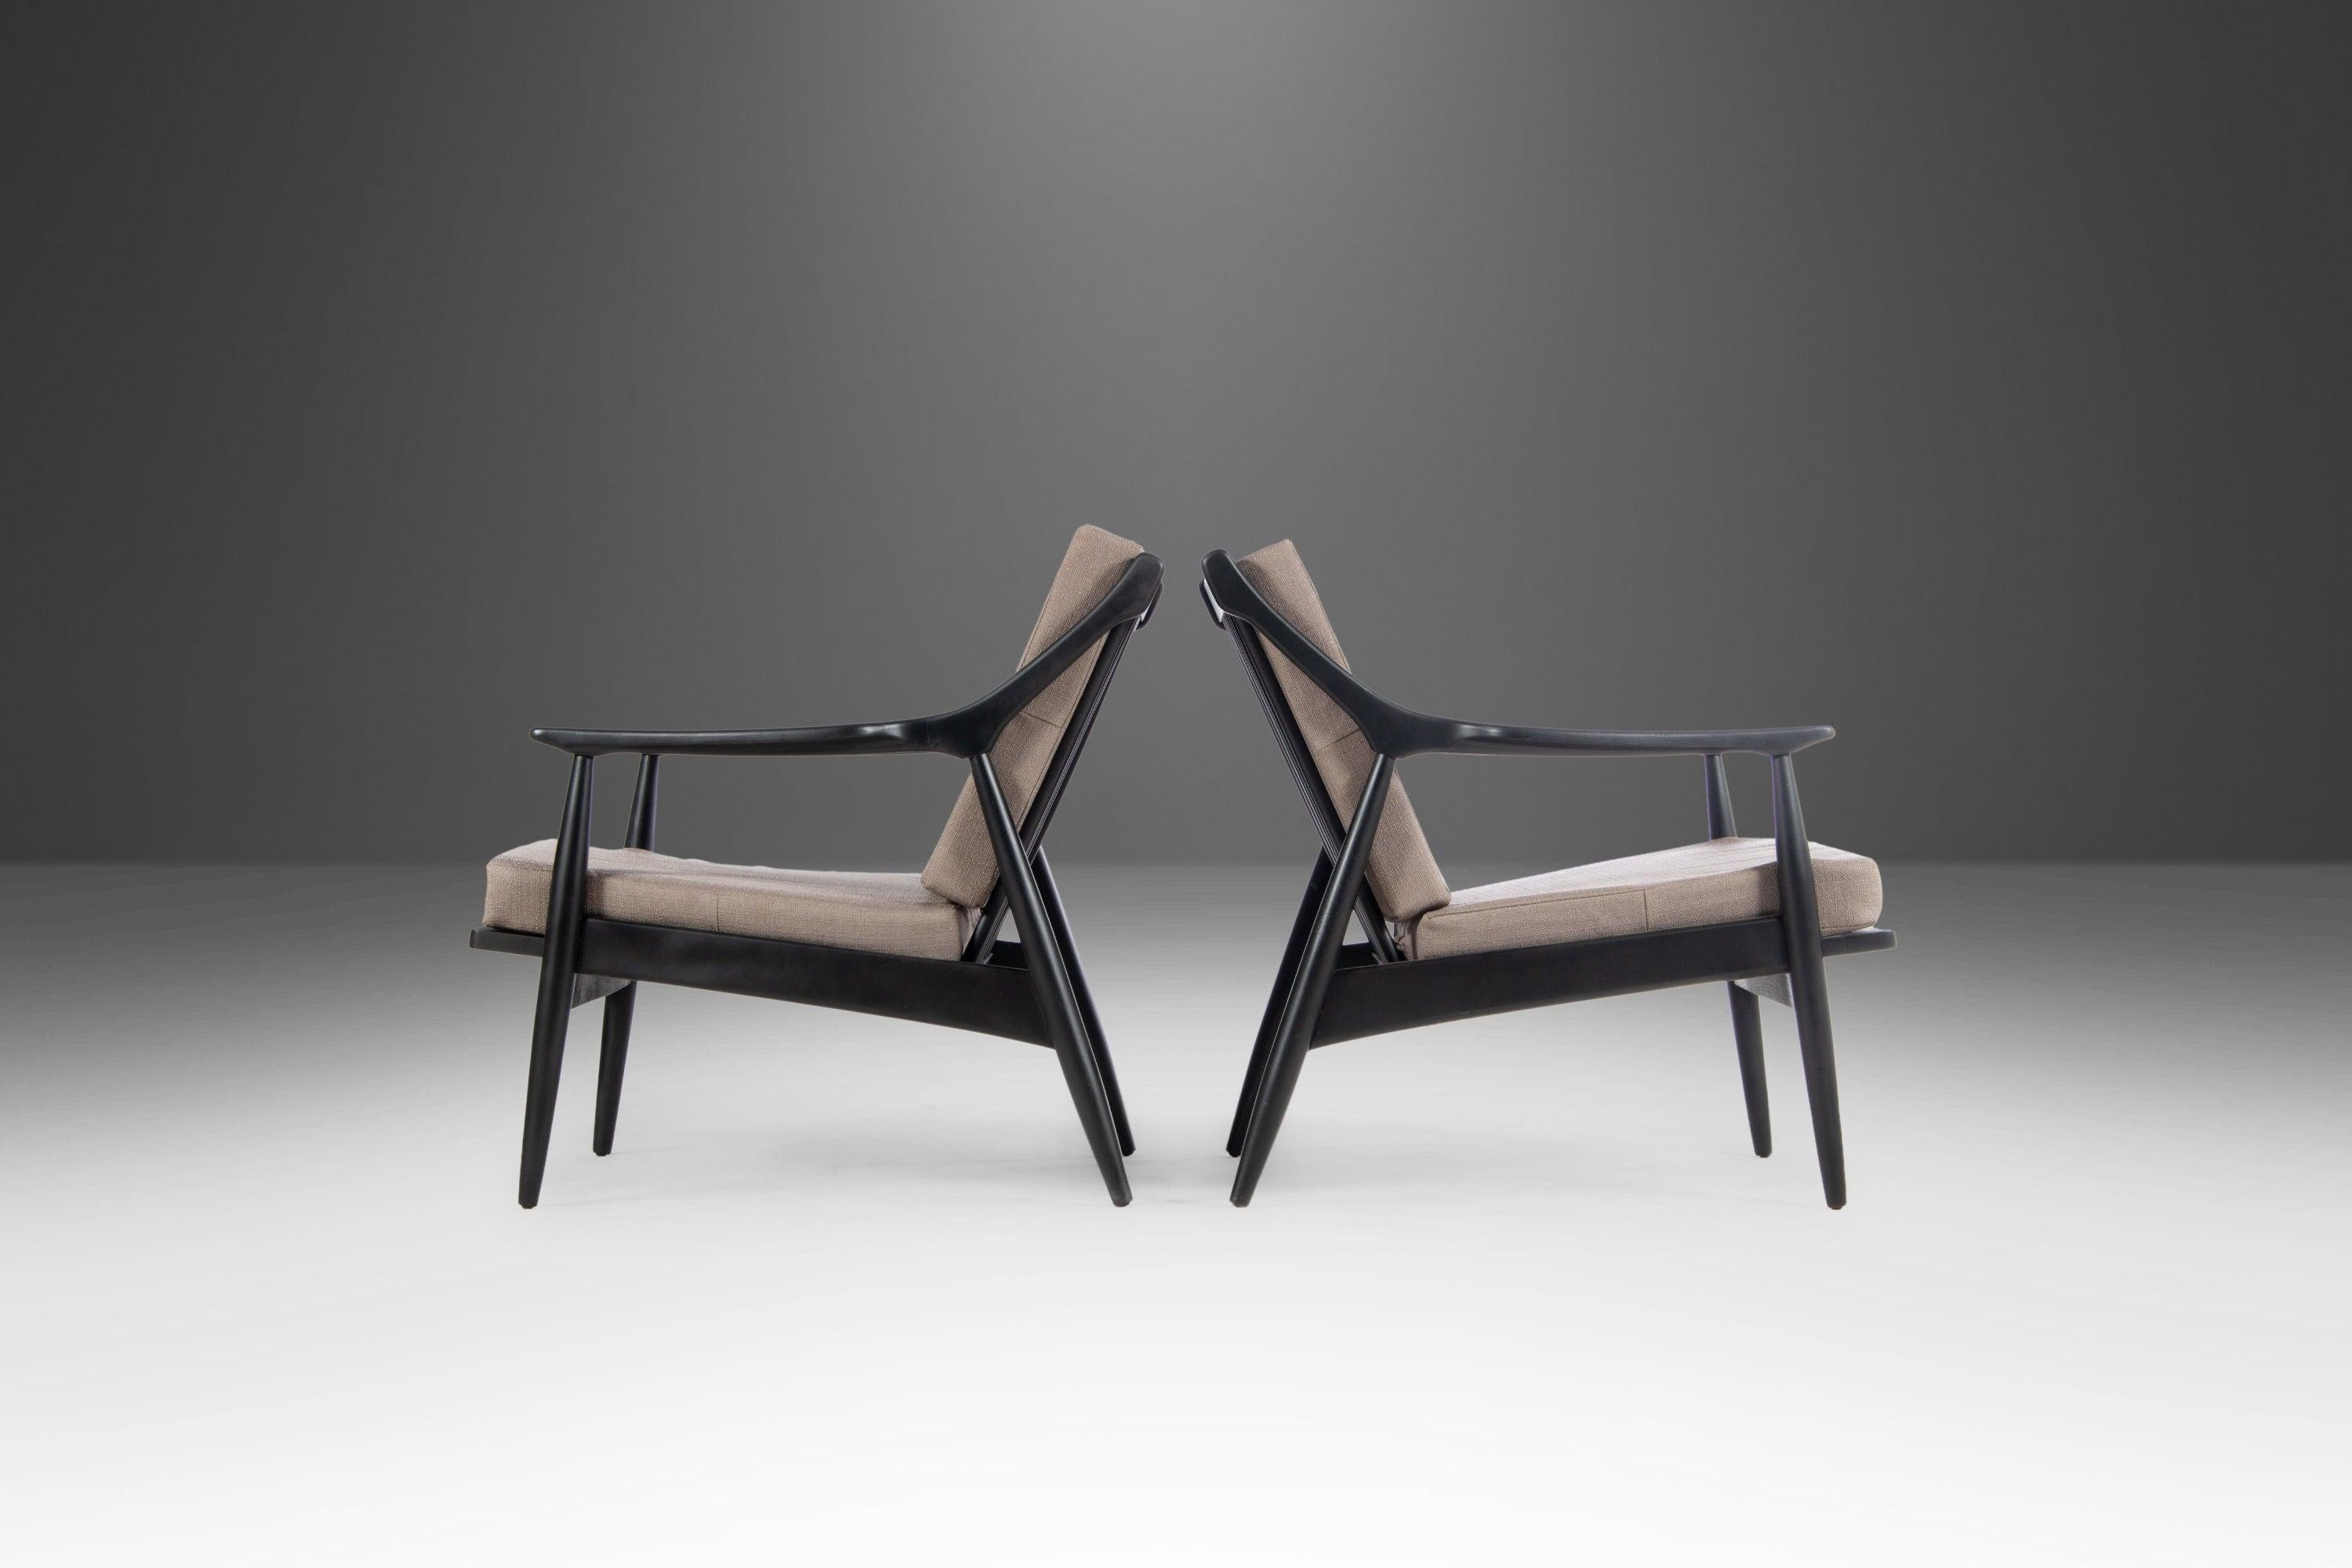 A newly restored set of two lounge chairs by Paoli. Constructed from walnut with excellent attention to contour and lines. Newly painted ebony and newly re-upholstered in Knit Stone Grey by Celione.

---Dimensions---

Width: 26.5 in / 67.31